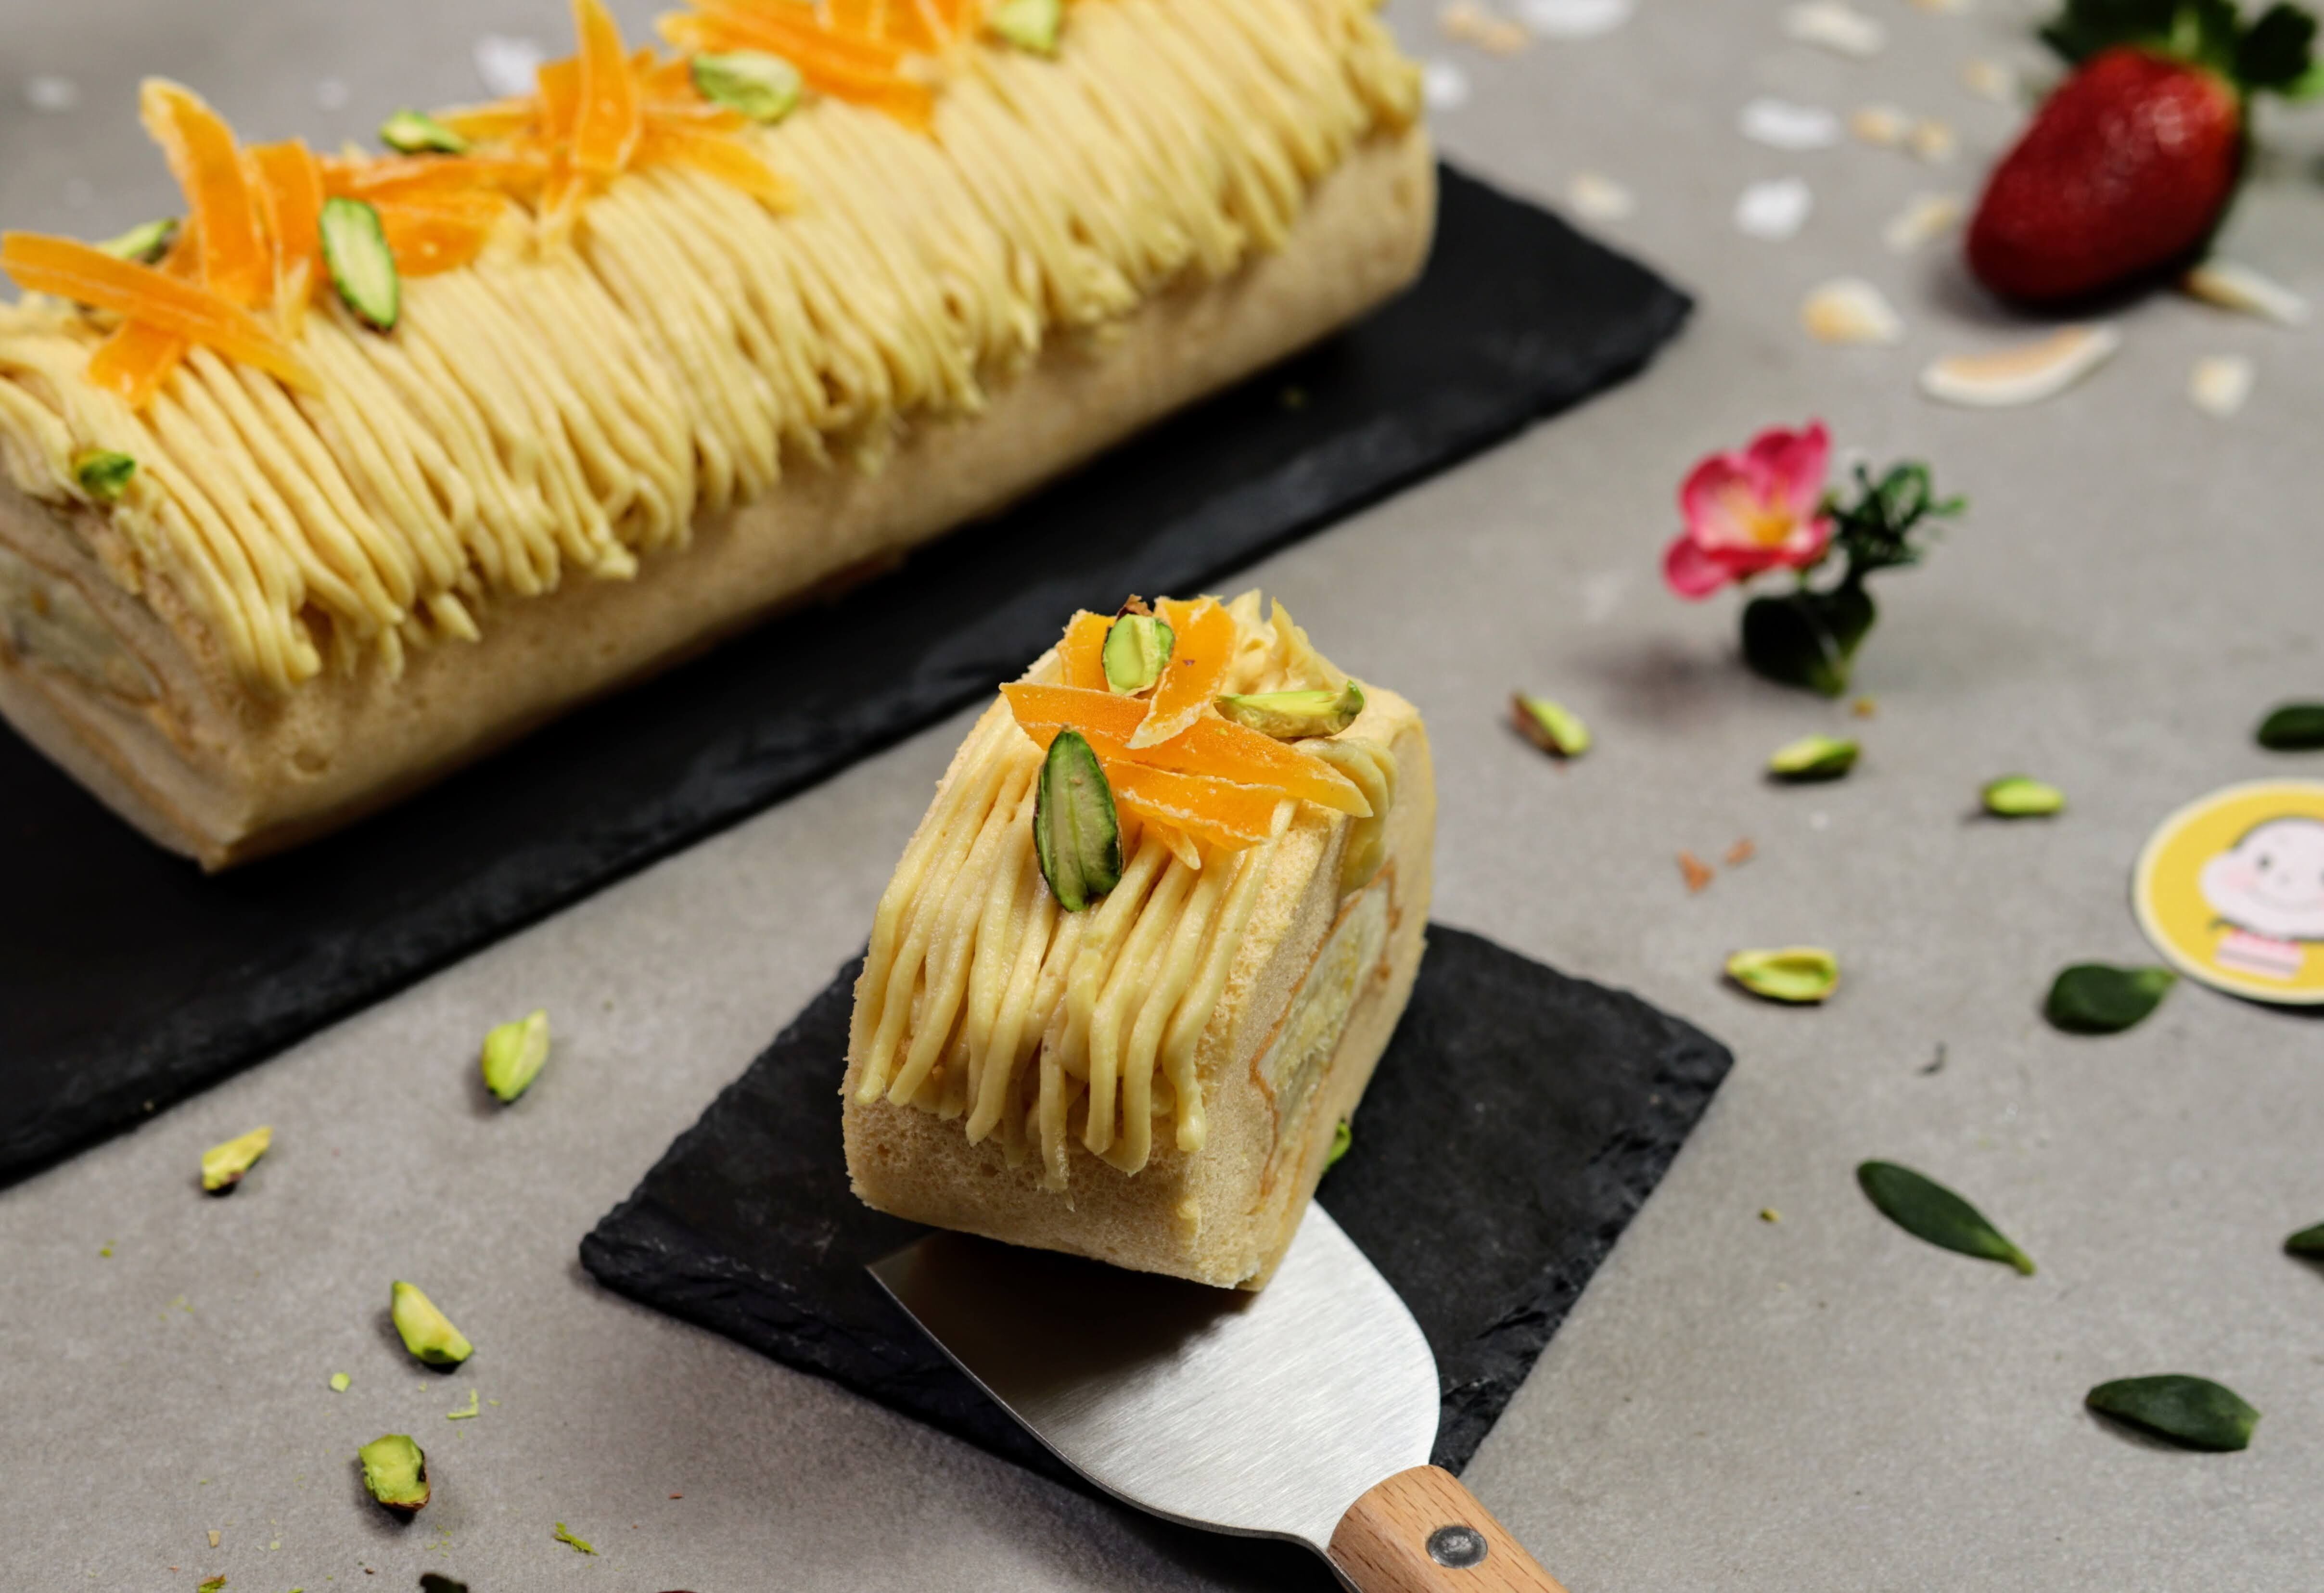 Cake Roll - Durian